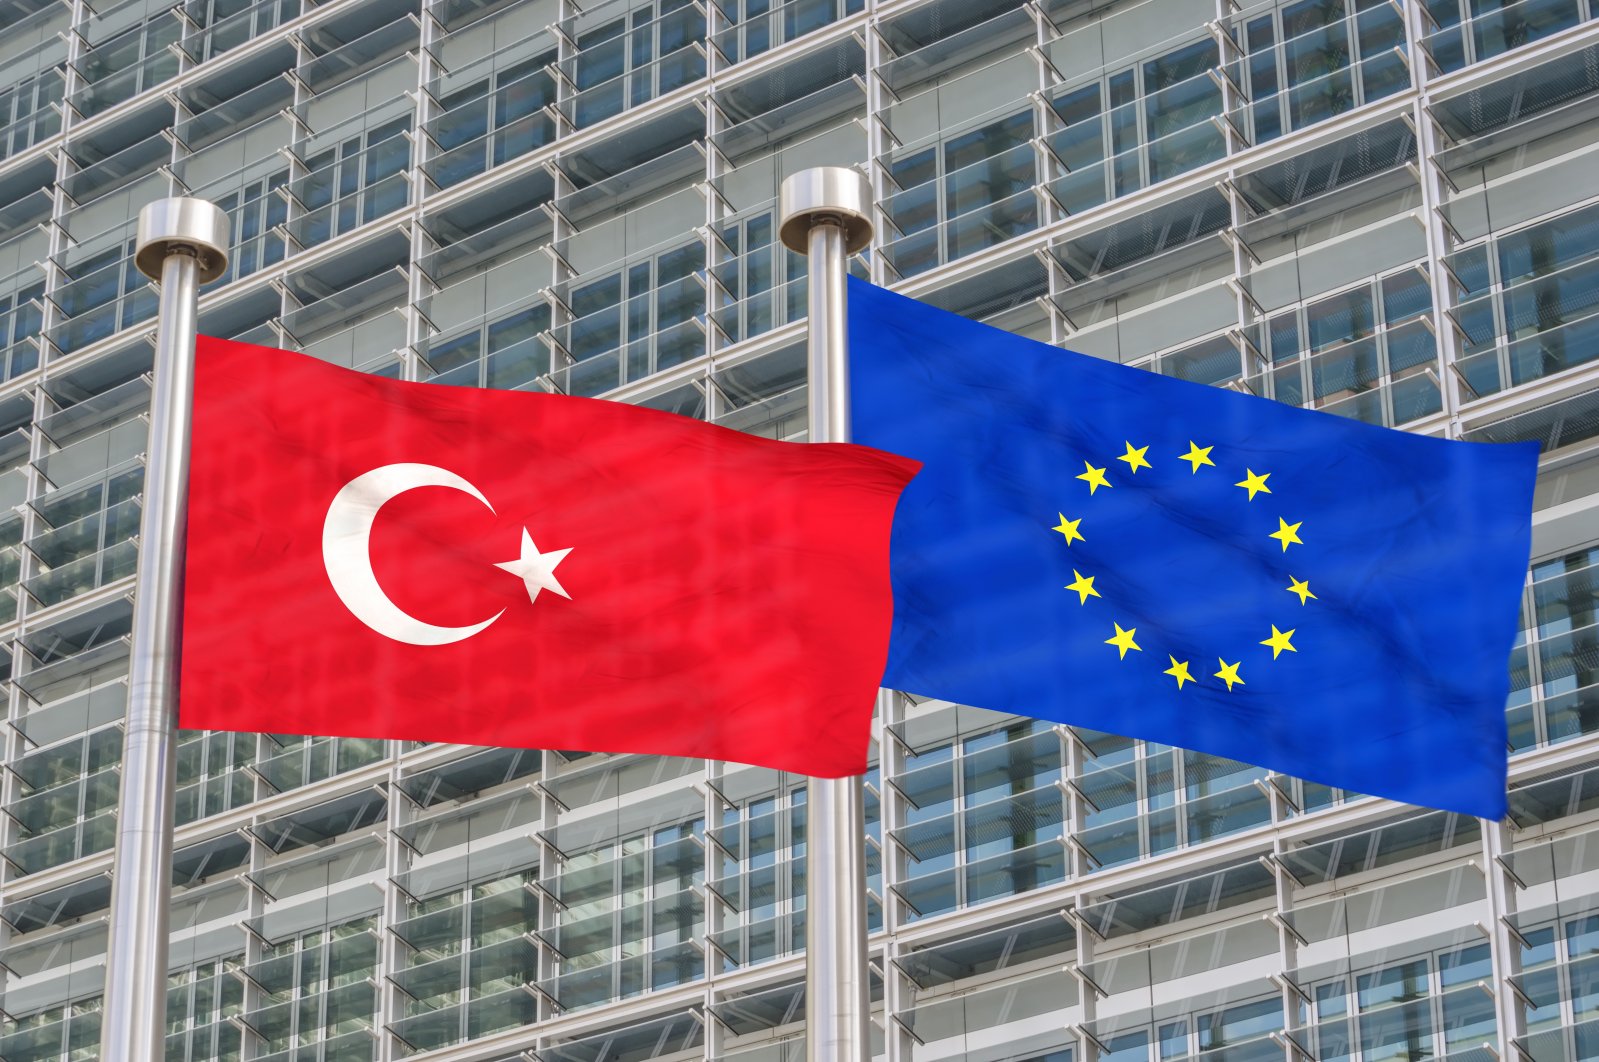 Türkiye and Europe flags waving in the wind in this undated file photo. (Shutterstock File Photo)